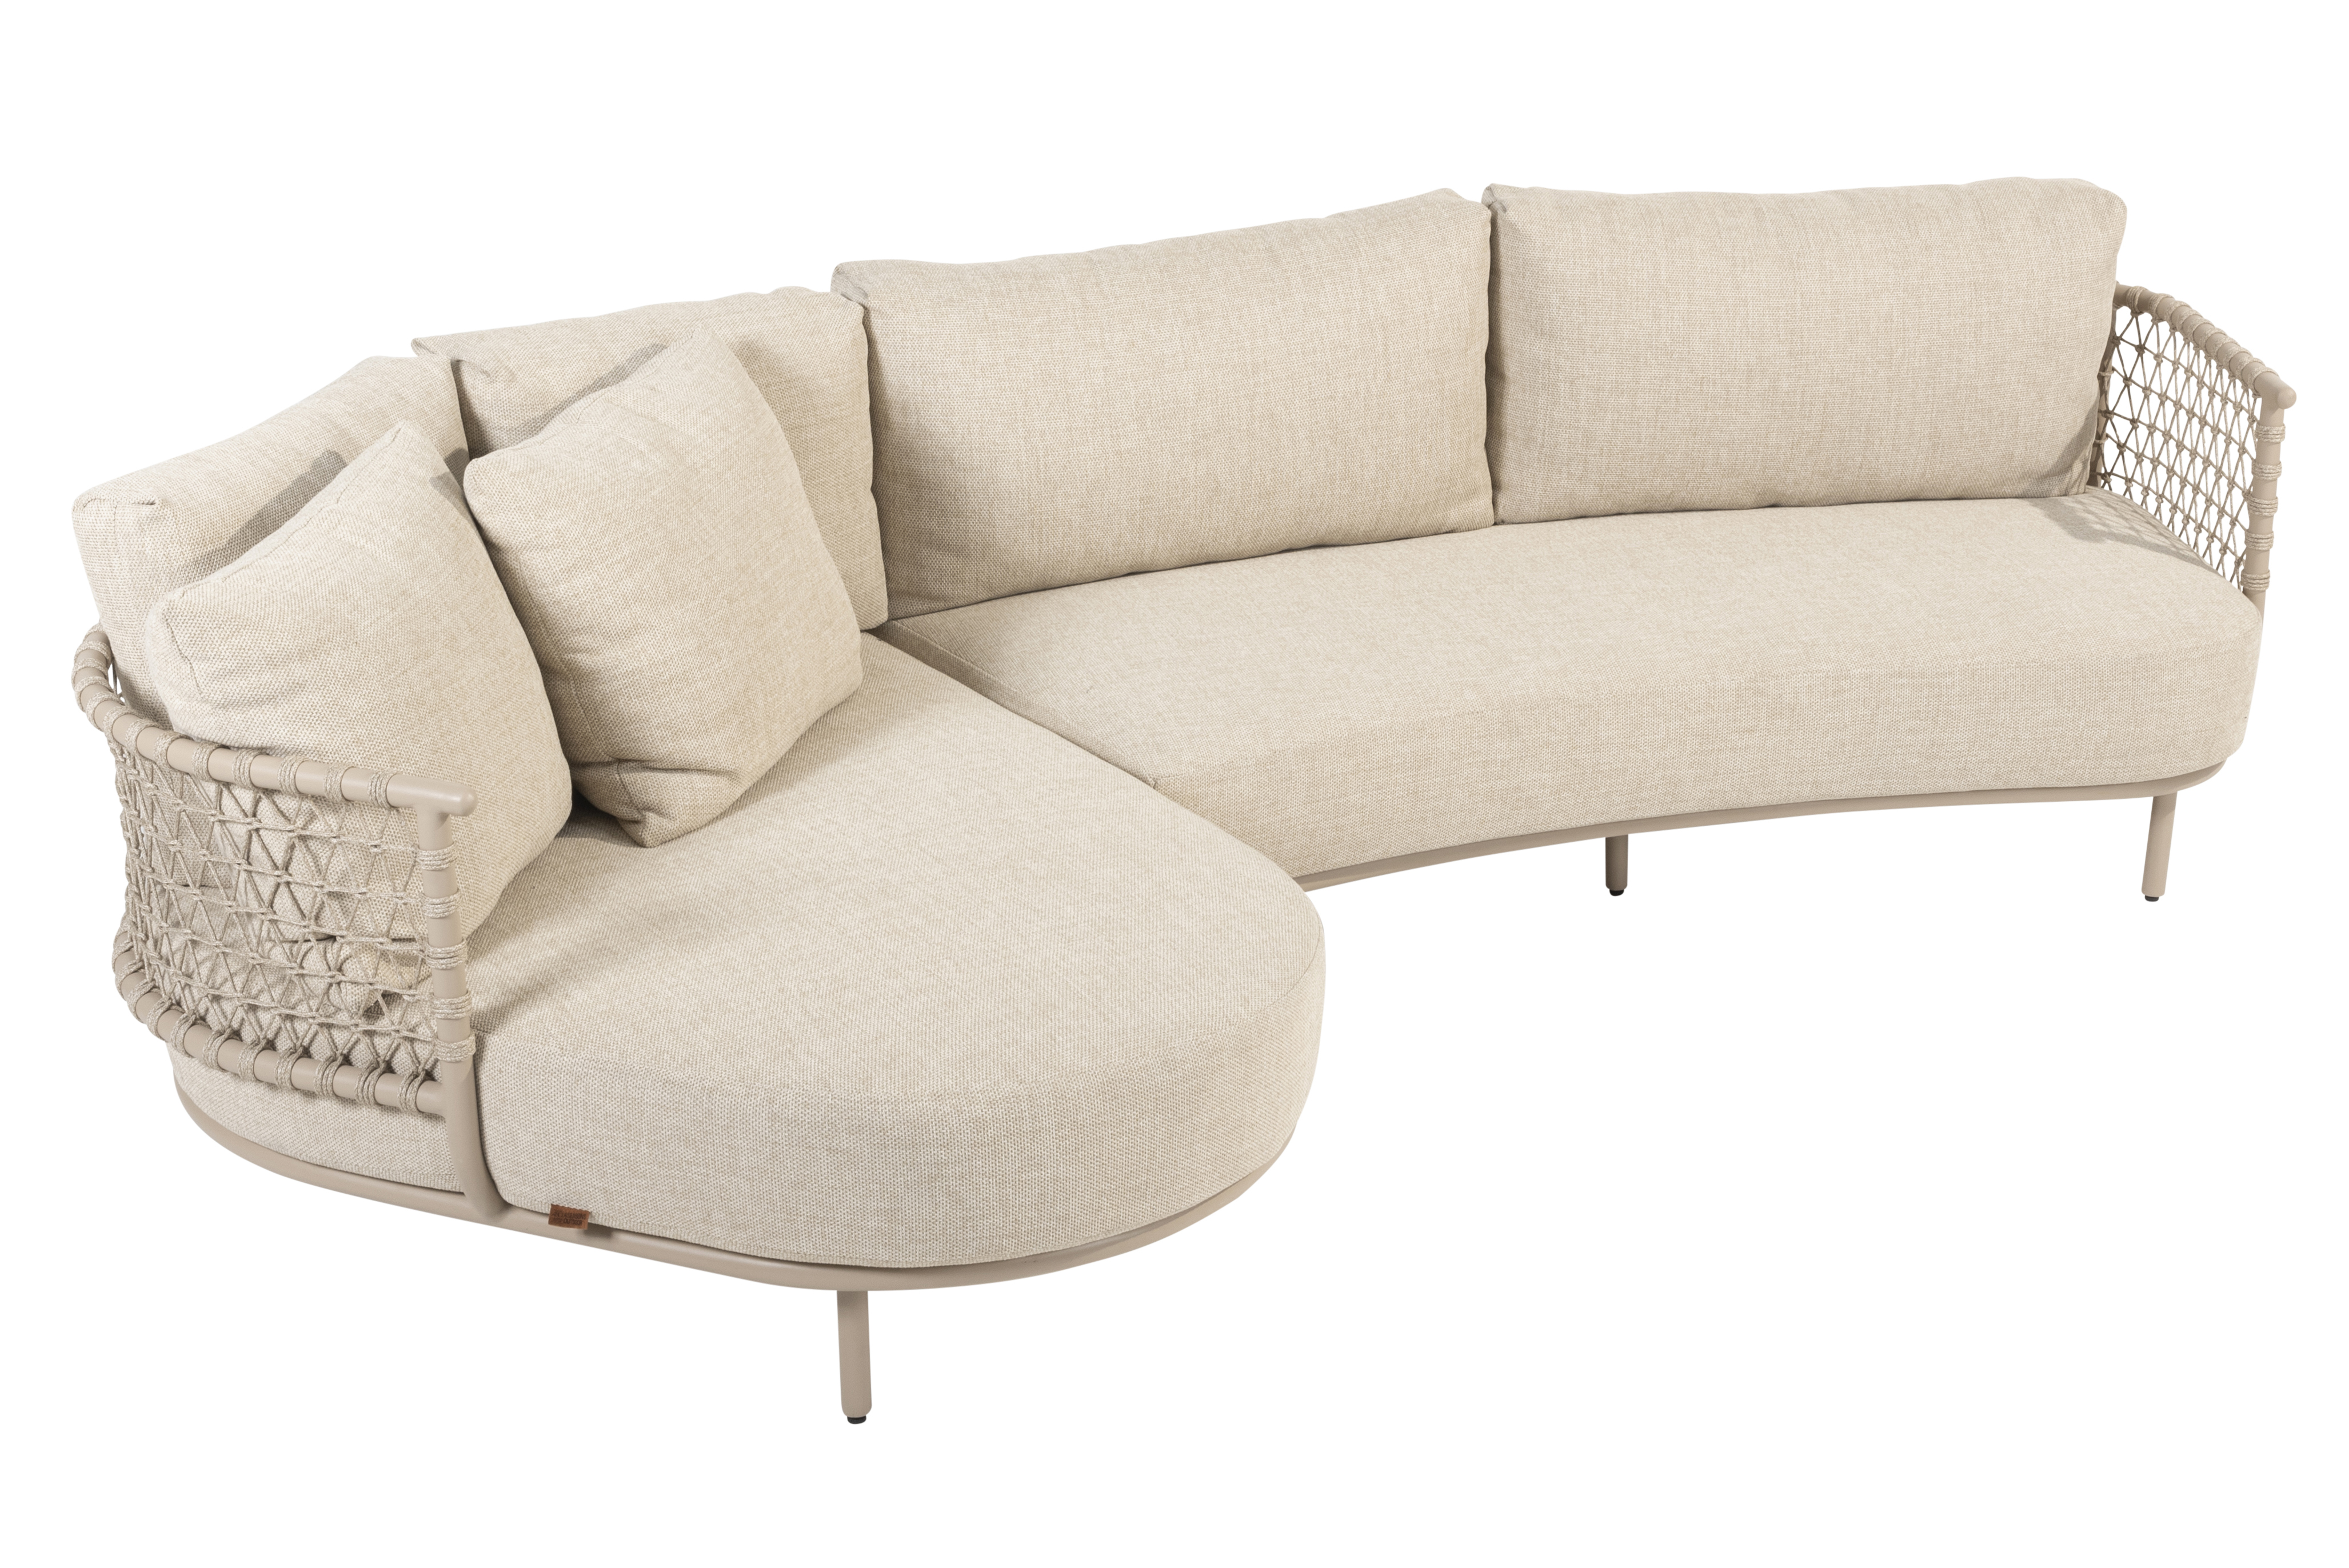 214041-214042_ Sardinia chaise lounge living sofa without table _03